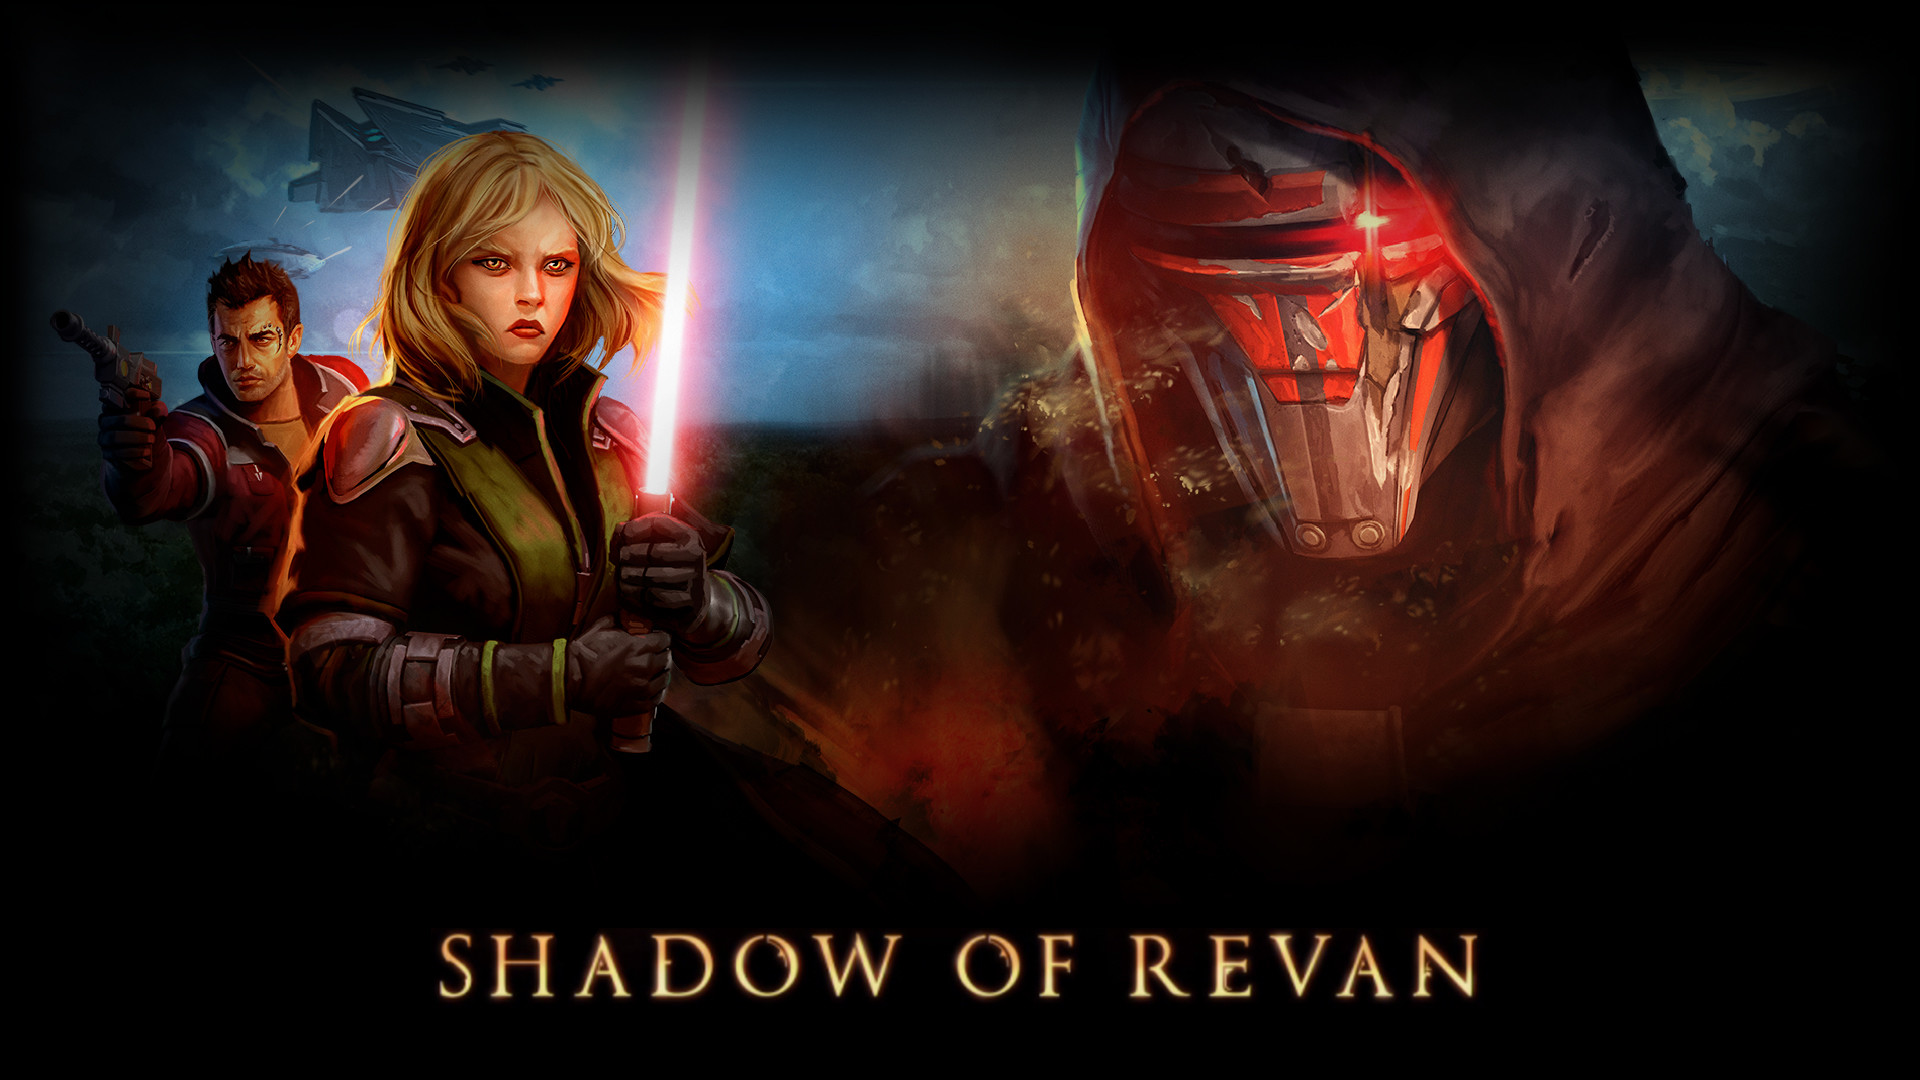 Shadow of Revan Wallpaper w/ Text- 1920 by 1200 | 1920 by 1080